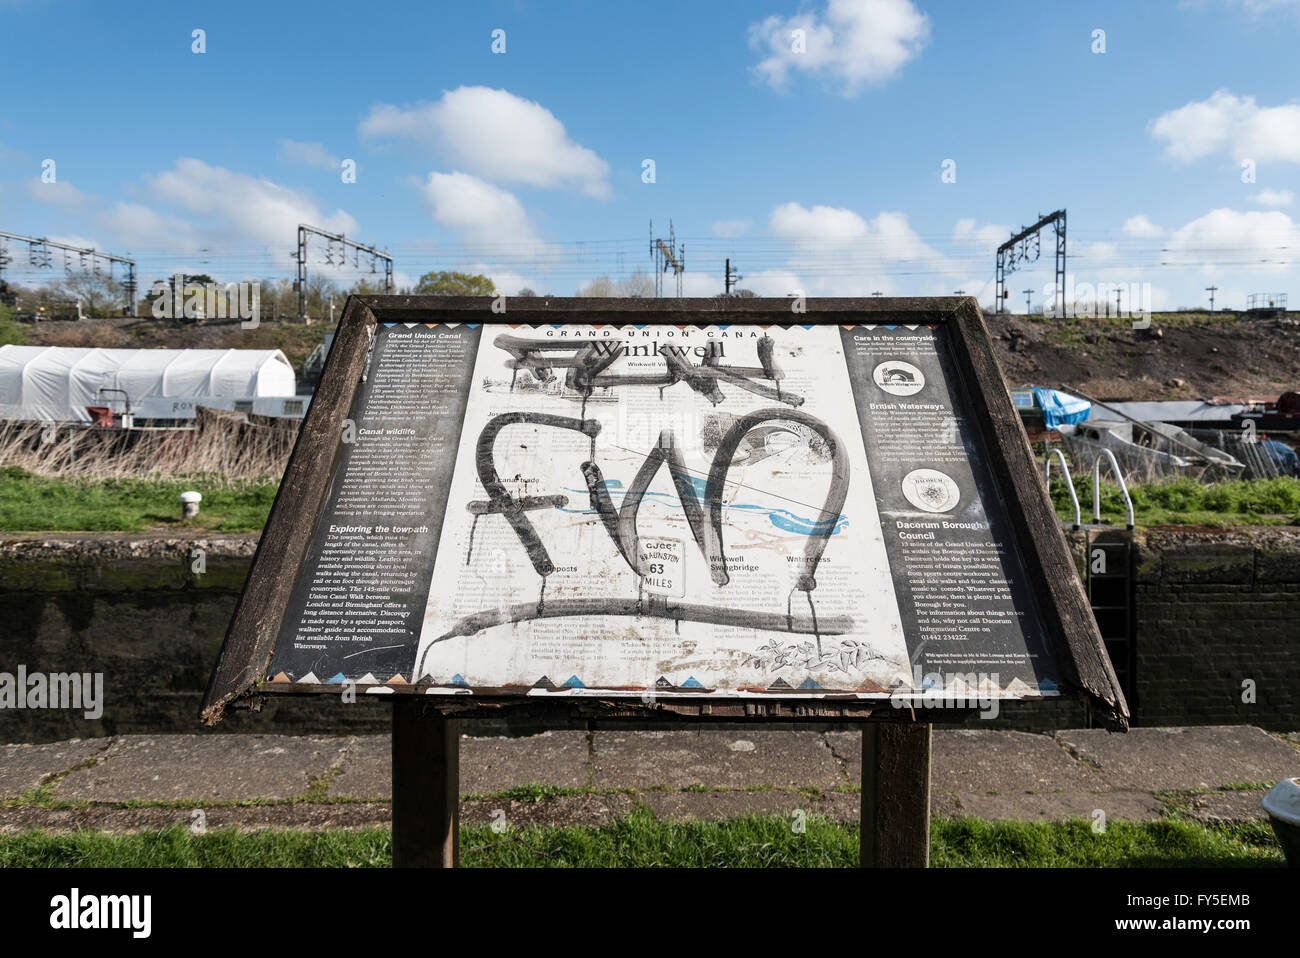 Grand Union Canal information board at Winkwell defaced with graffiti. Stock Photo